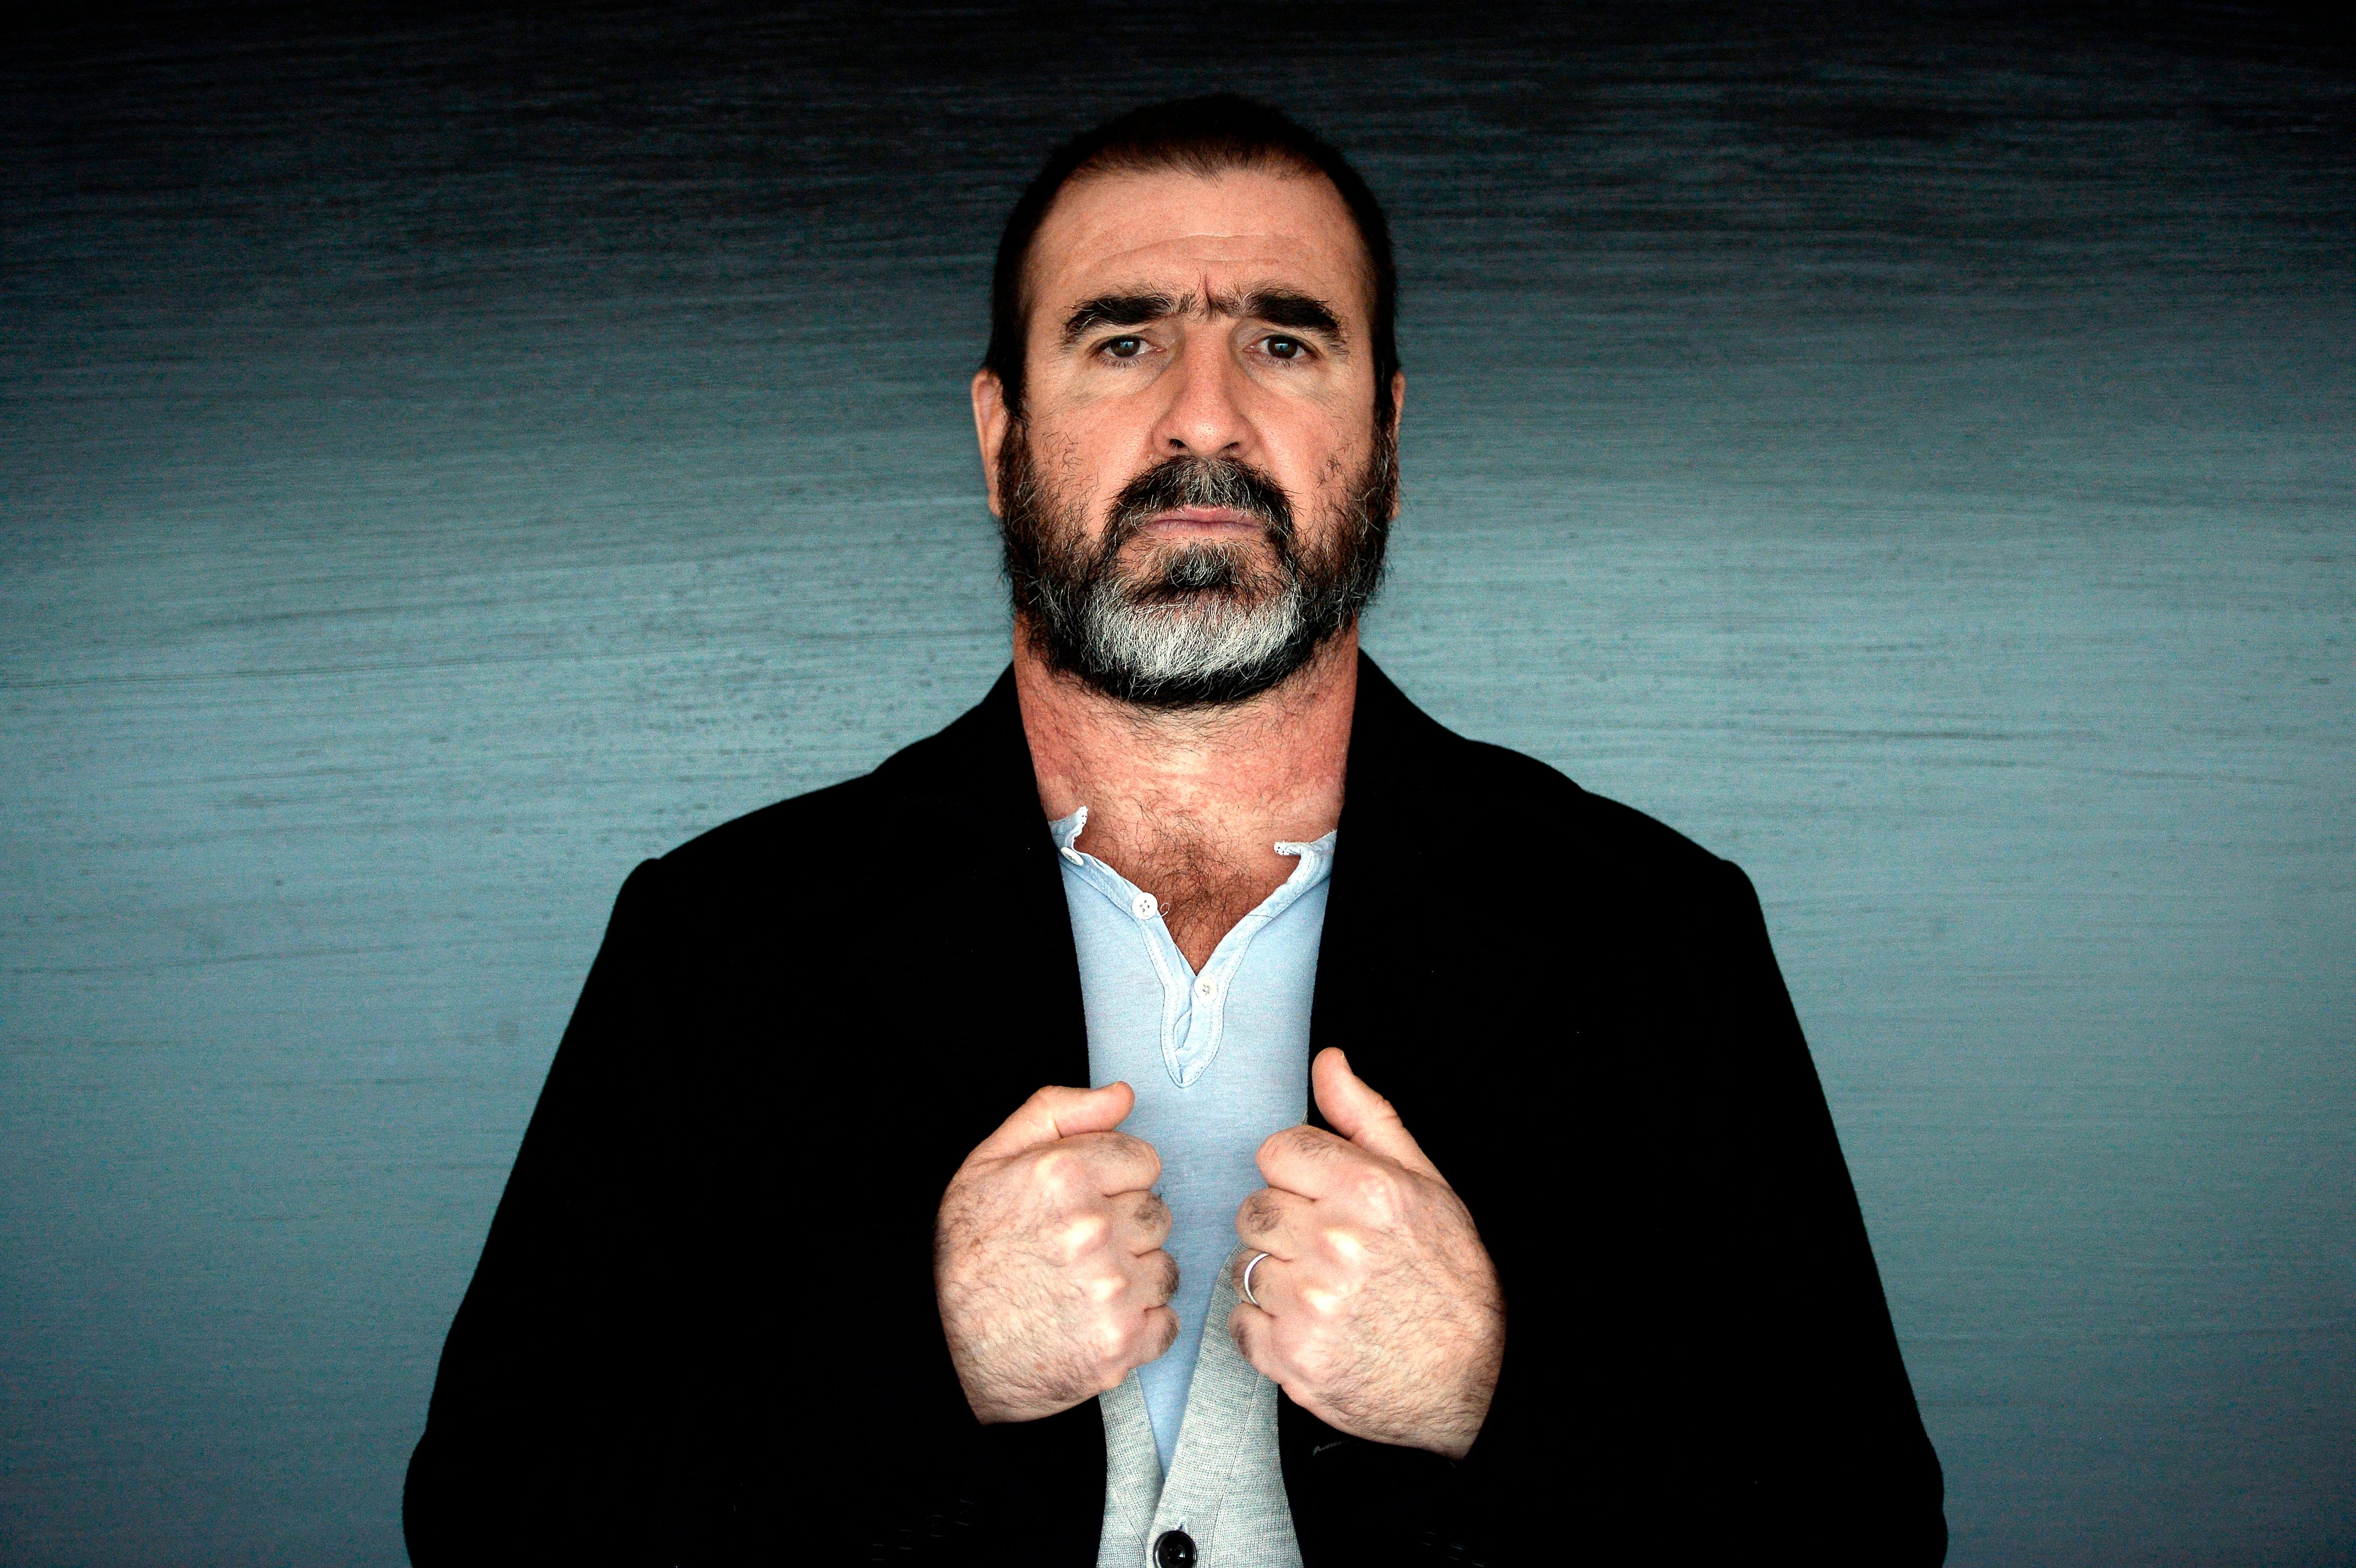 His goal celebrations, his presence, his rare gnomic utterances: to Cantona, everything is an opportunity for theatre